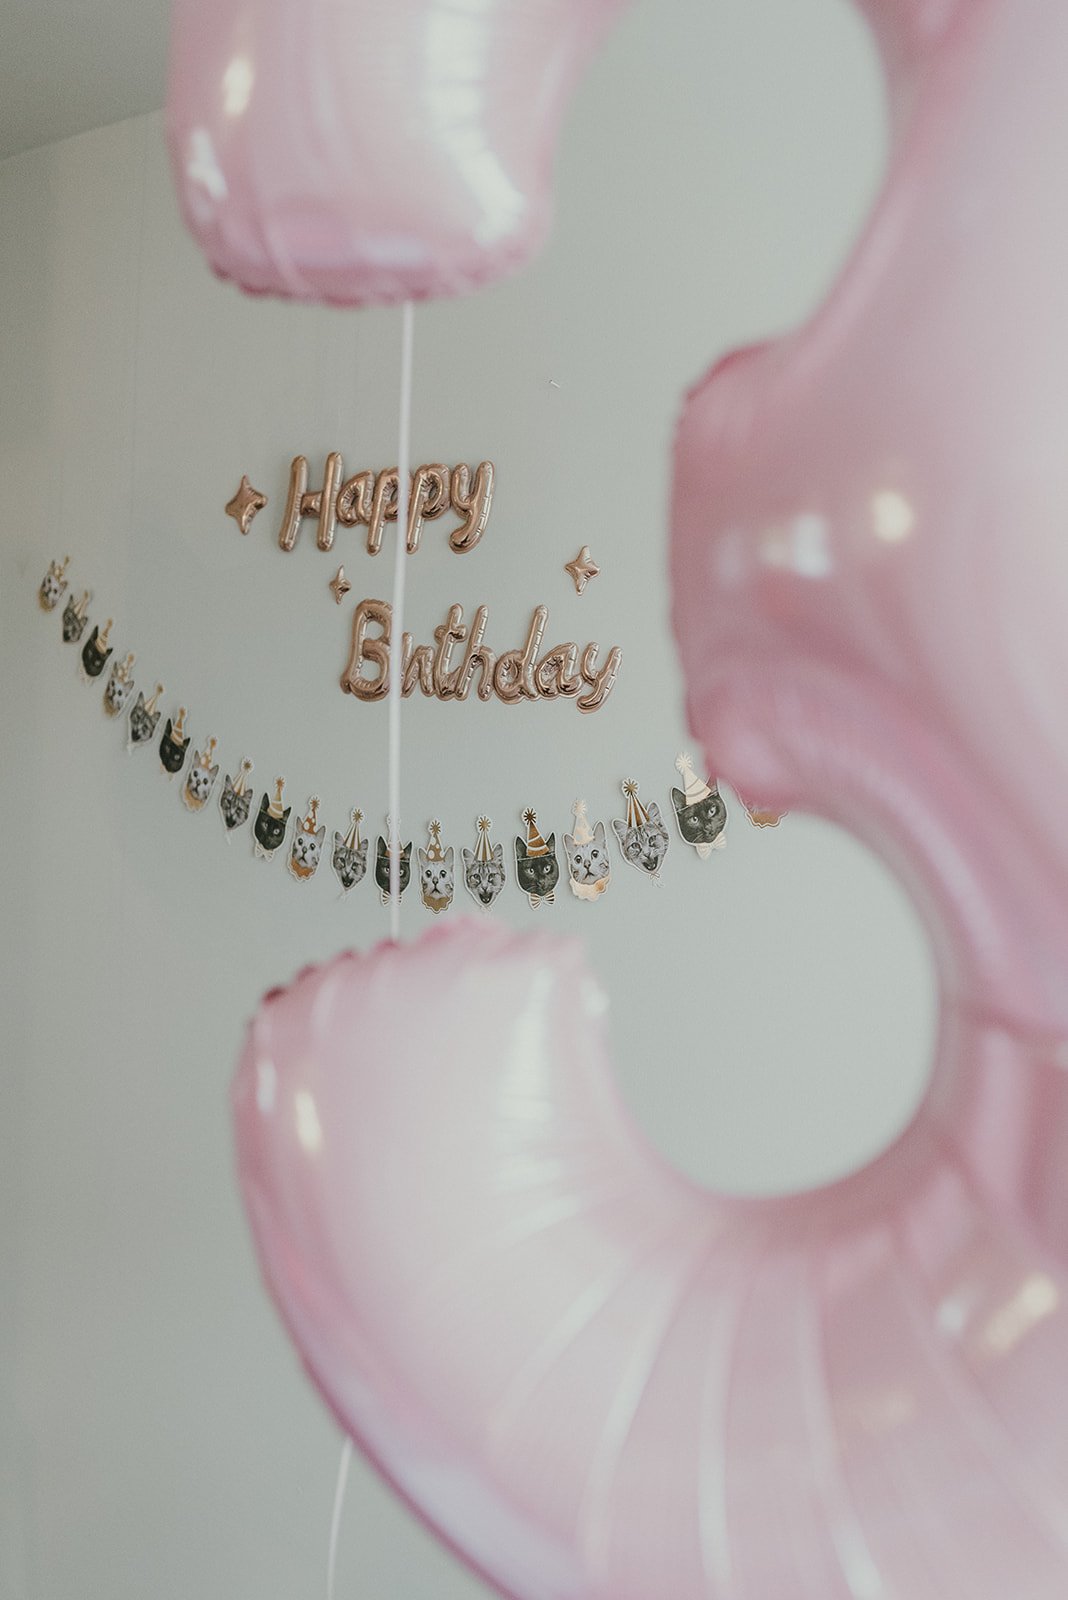 Kitty Kat balloon and wall decoration for 3rd birthday party